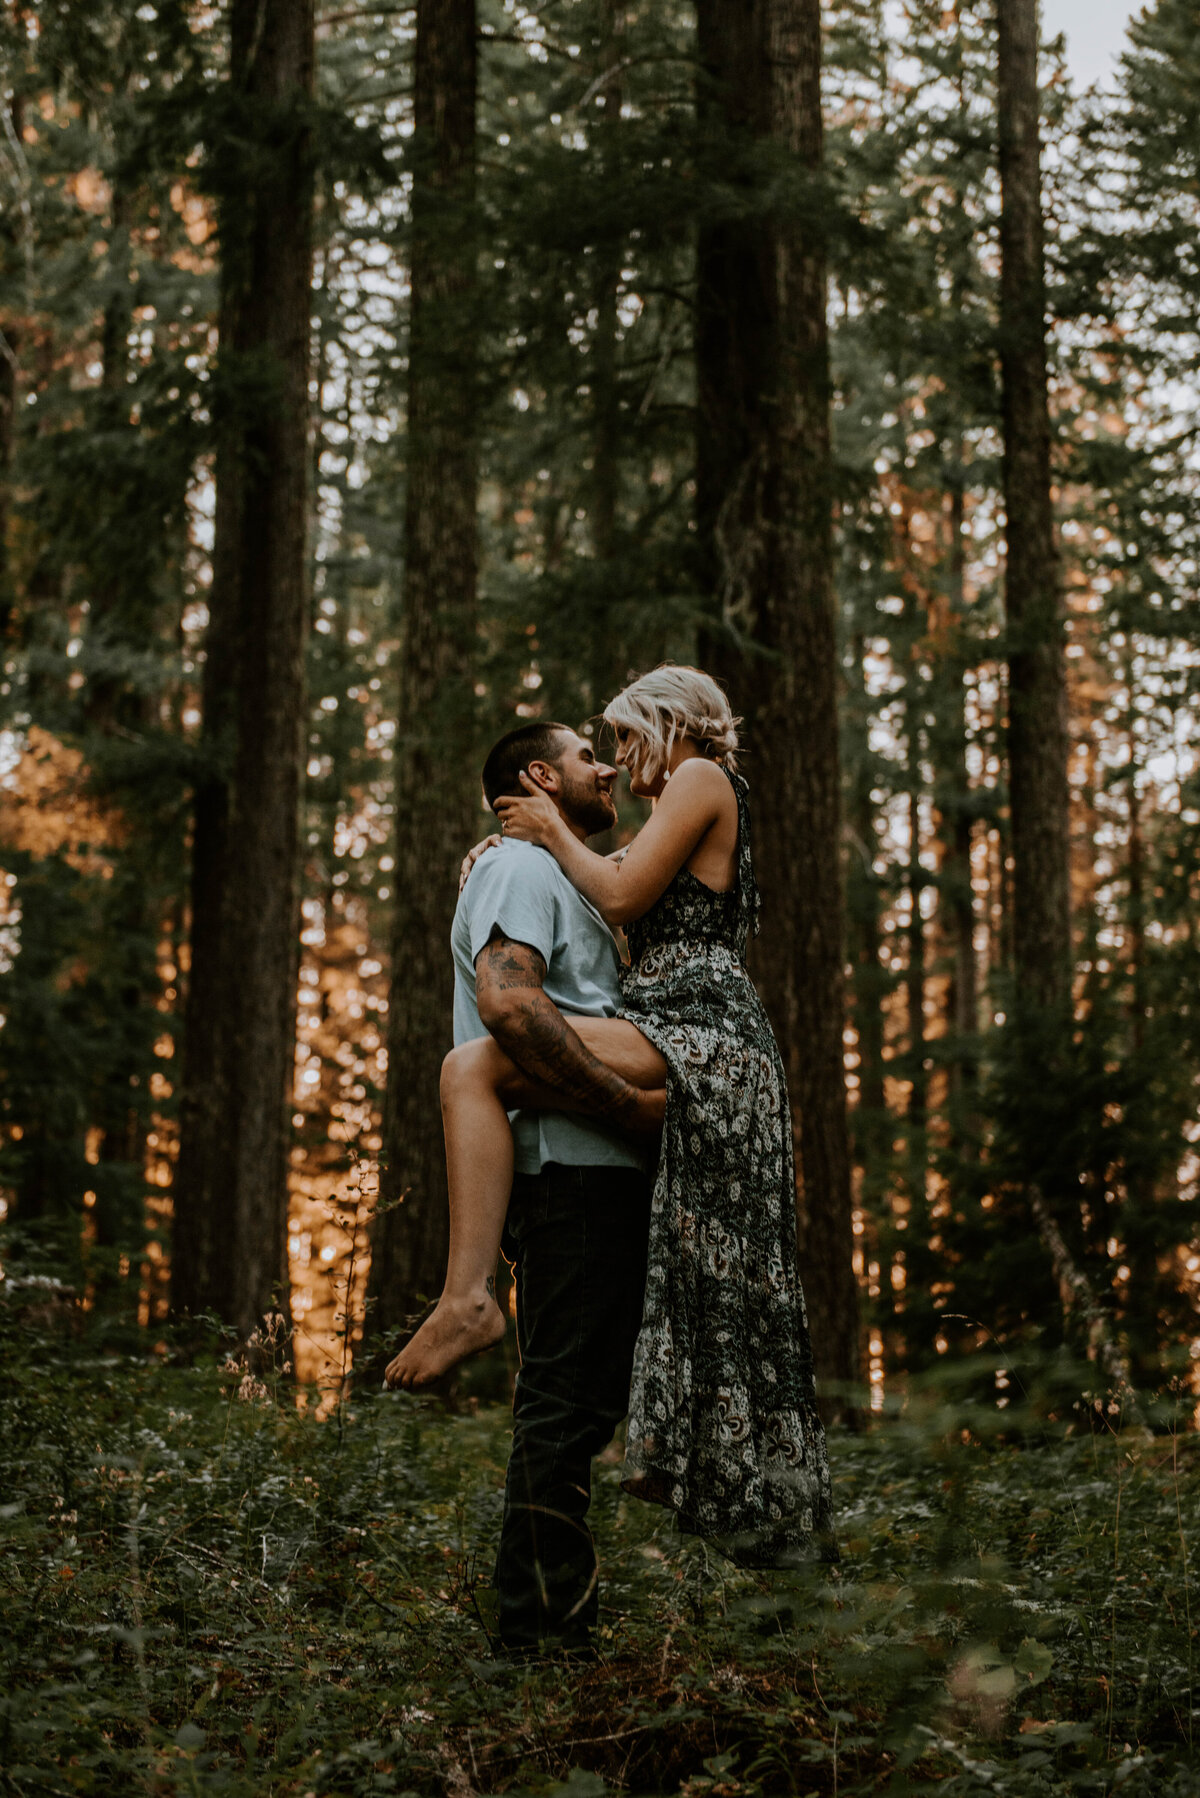 sahalie-falls-oregon-engagement-elopement-photographer-central-waterfall-bend-forest-old-growth-6866